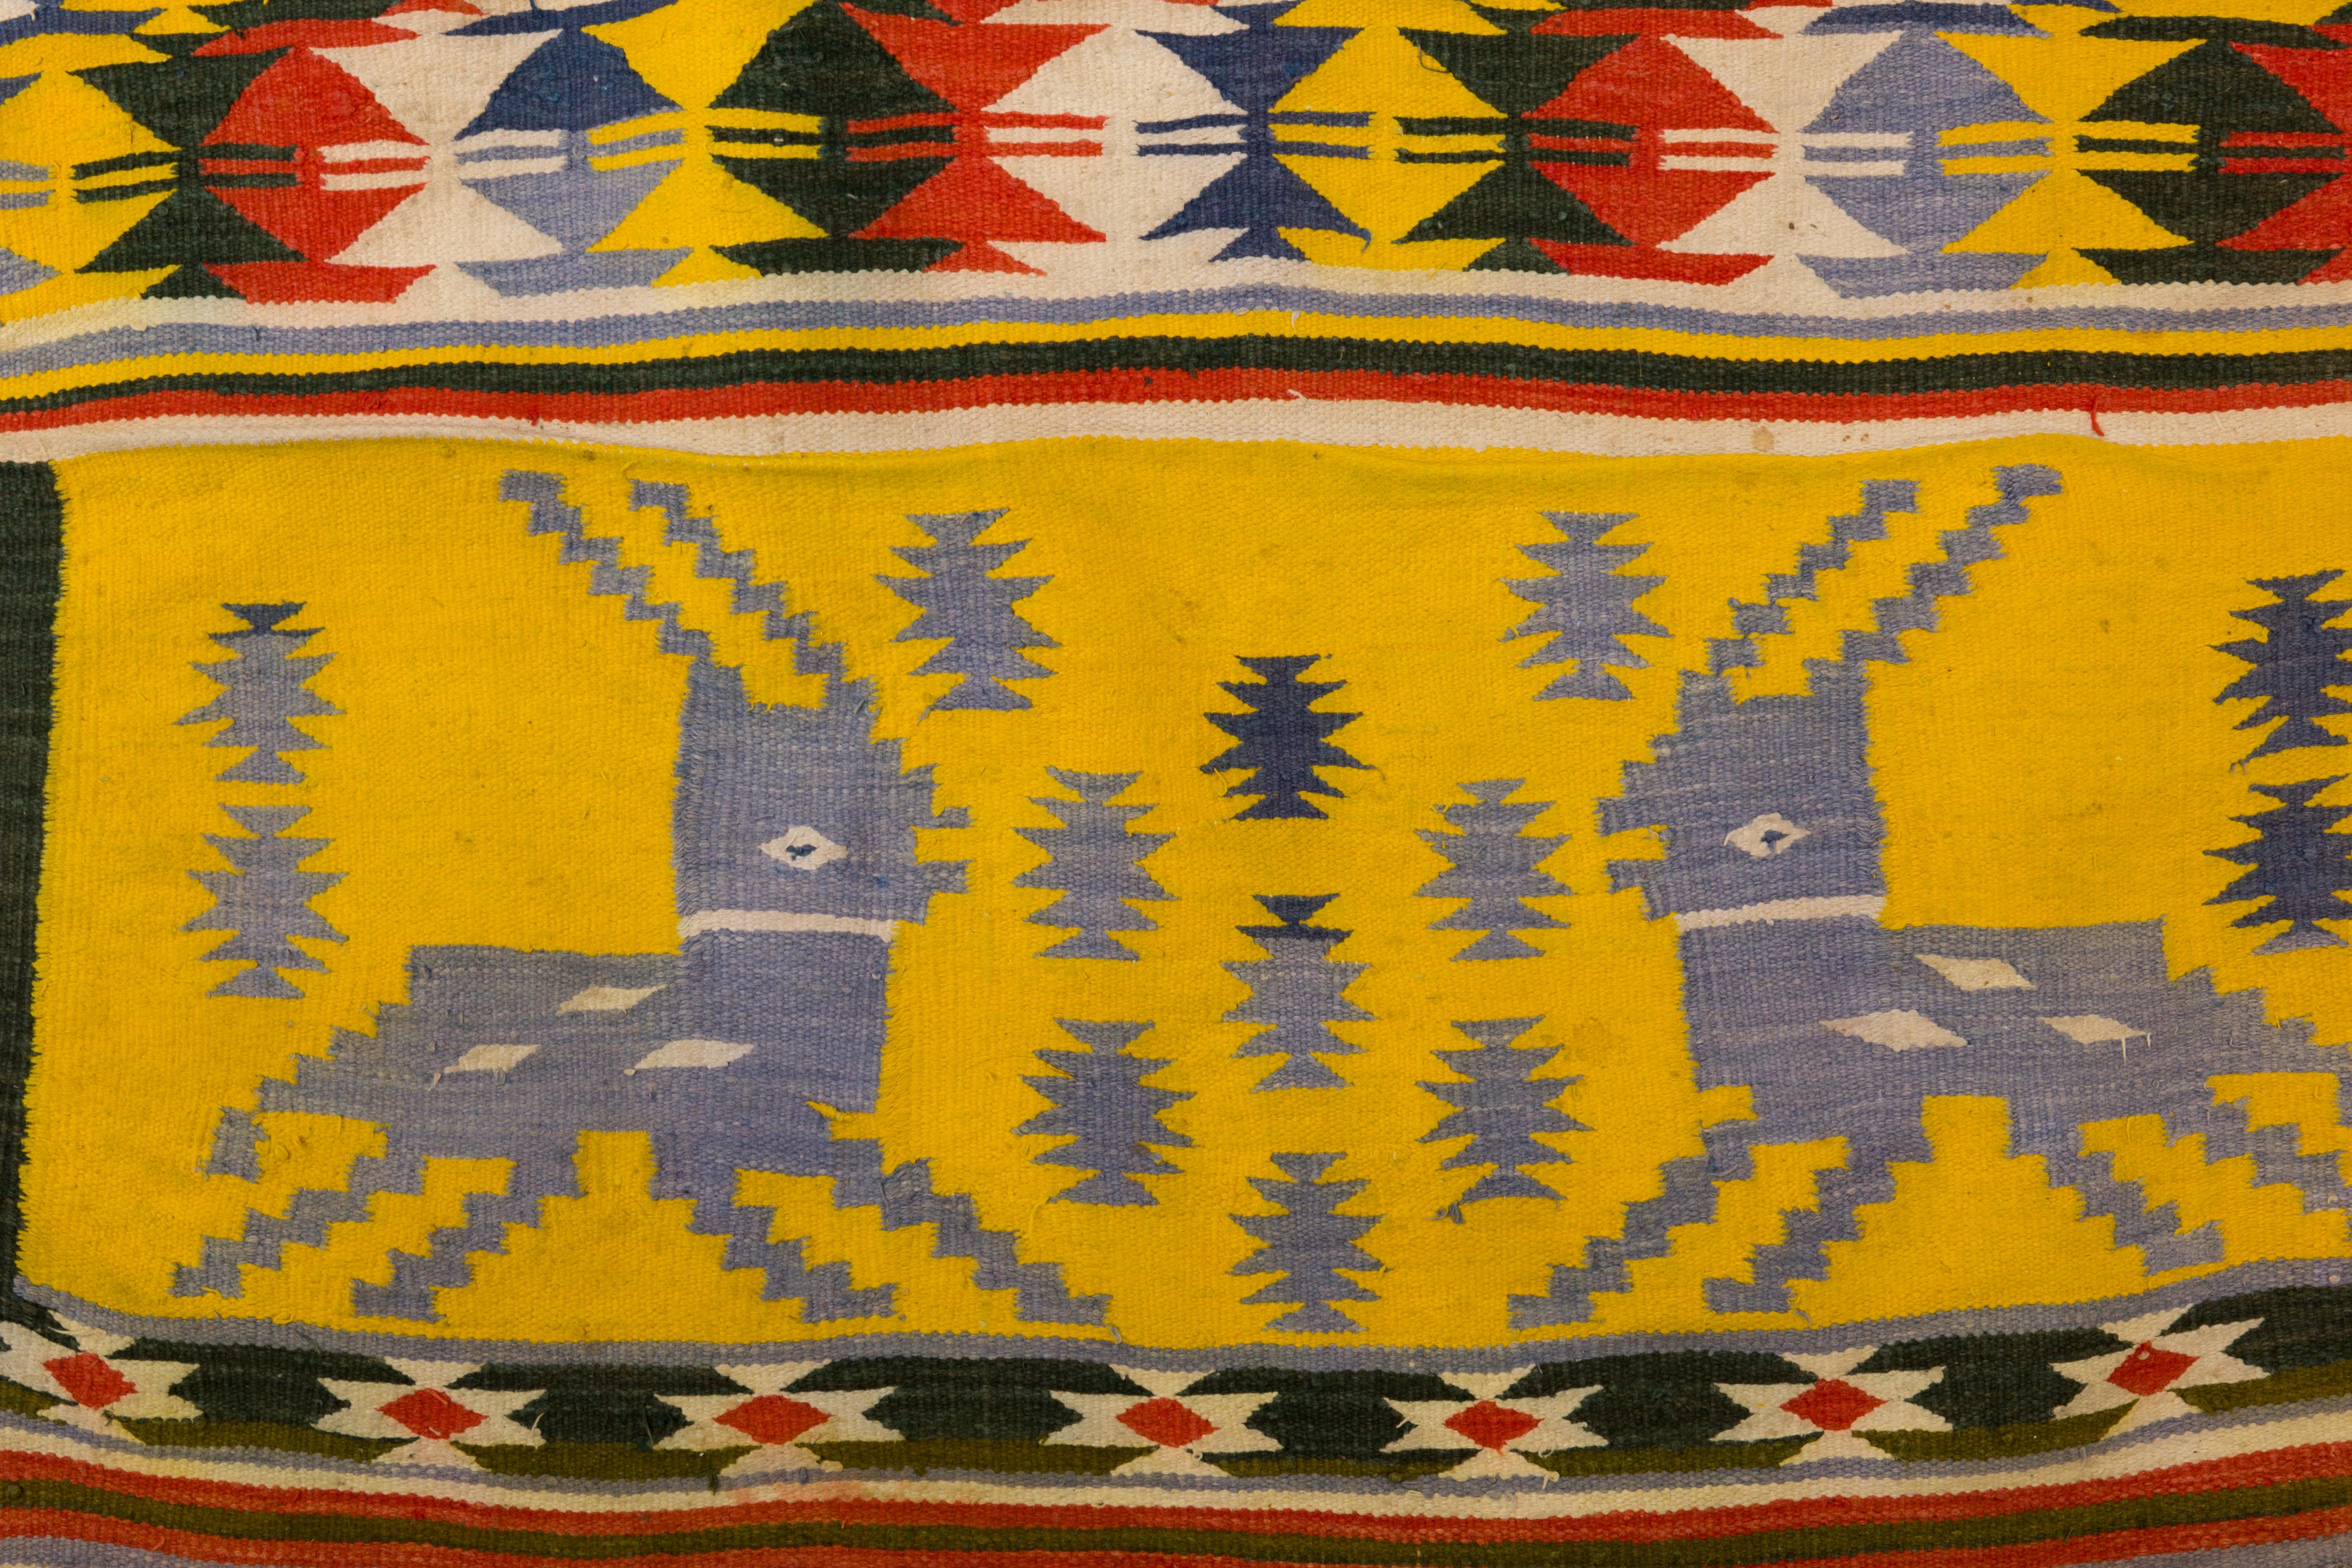 Midcentury handwoven multi-color cotton Dhurrie tribal rug with deer designs on each end. Hand knotted with fringe, Rajasthan, India, circa 1940s-1950s.